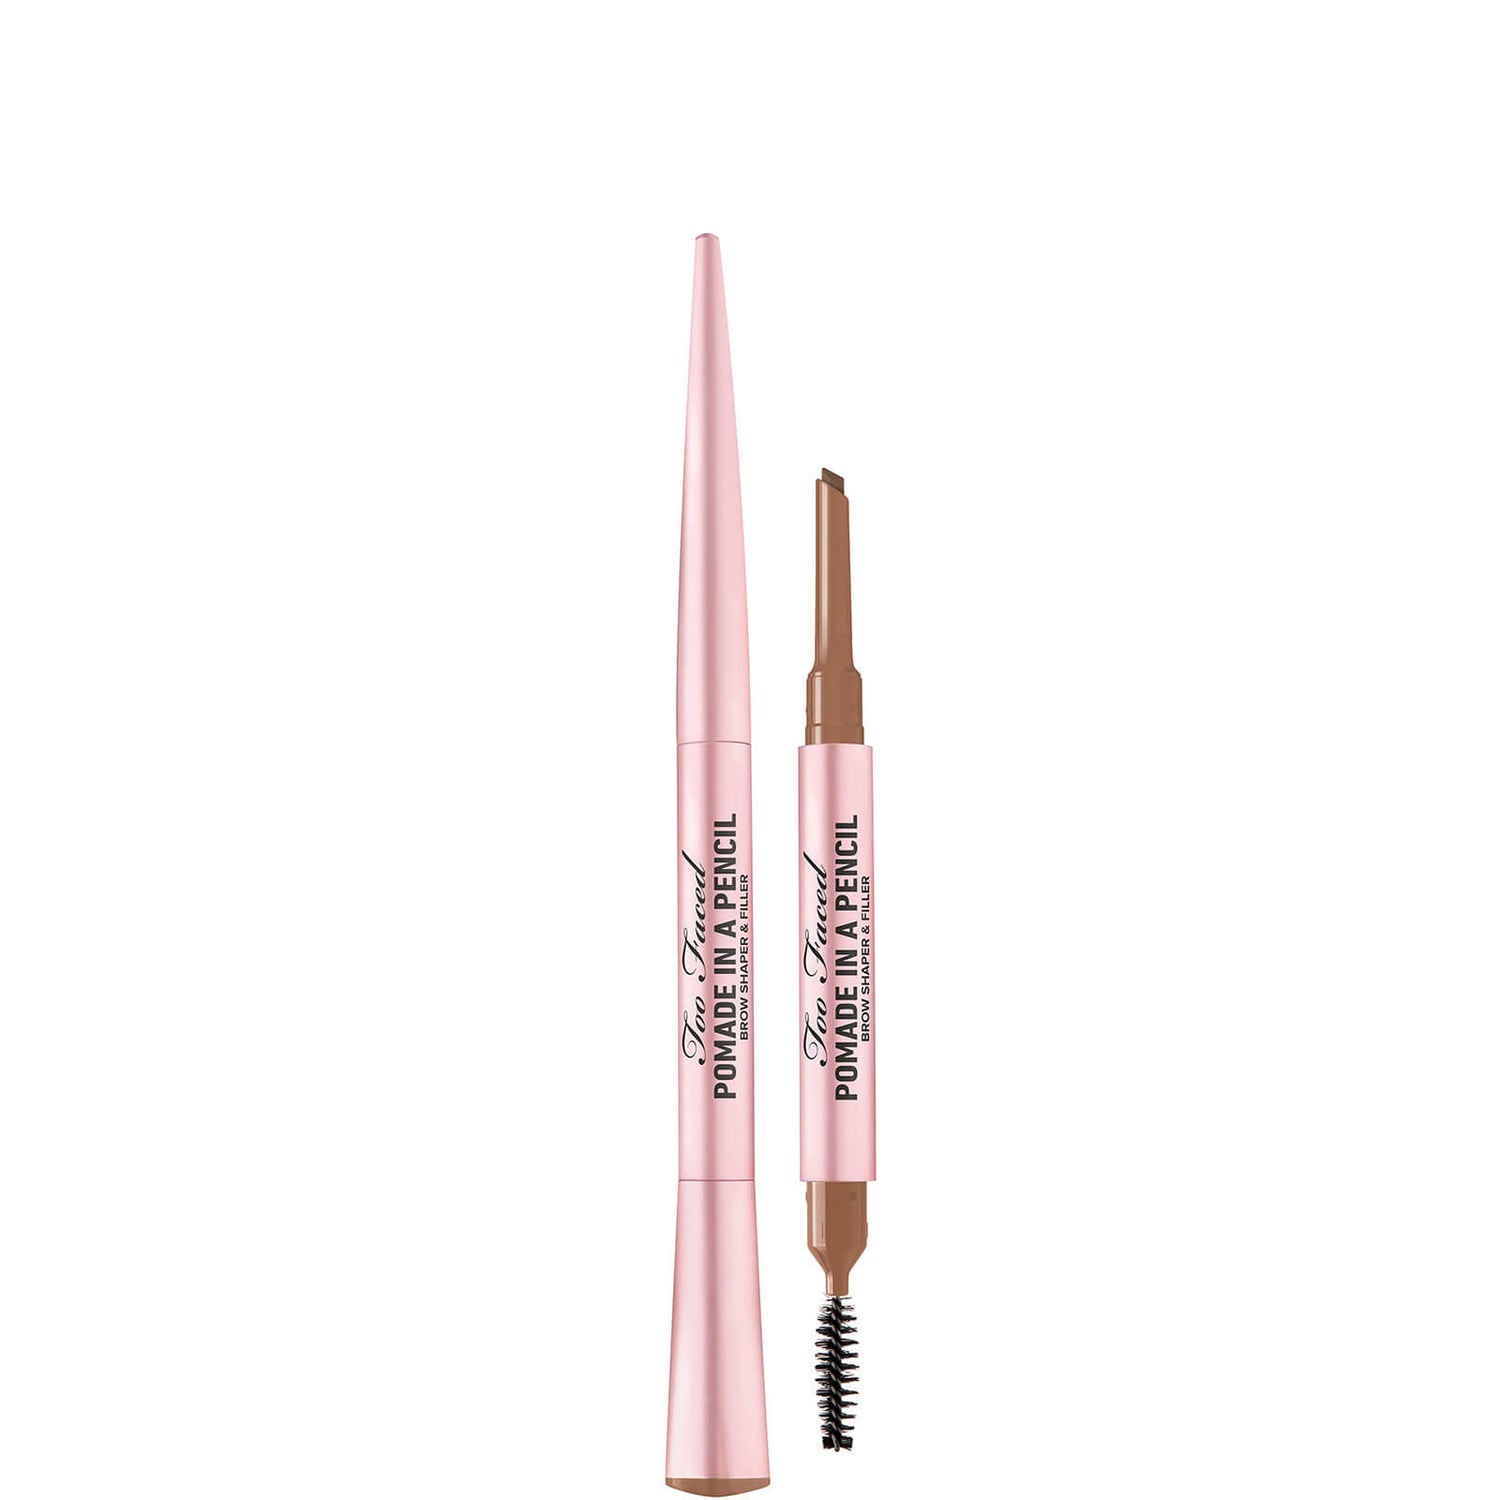 Too Faced Brow Pomade in a Pencil 0.19g (Various Shades)